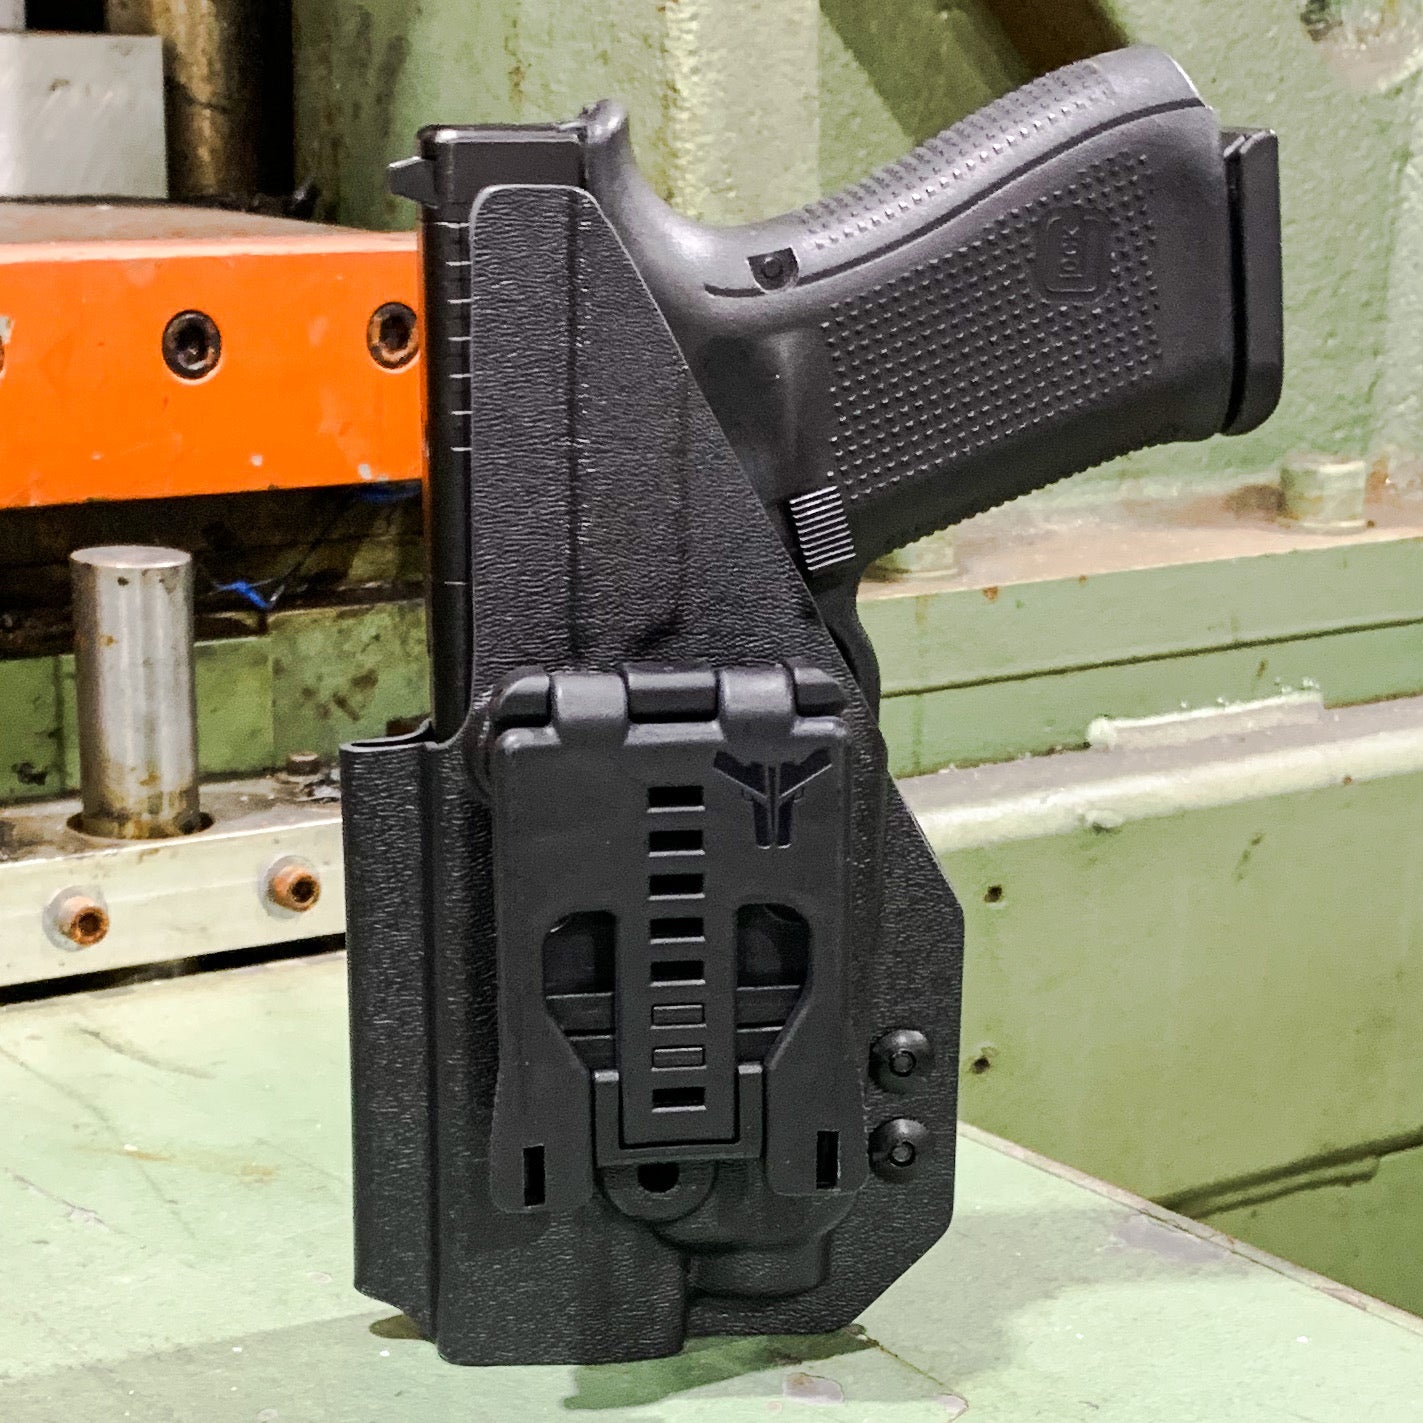 Outside Waistband Kydex holster designed to fit the Glock Gen 5 with the 19 length slide and the Streamlight TLR-7 or TLR-7A light. Full sweat guard, adjustable retention, profiled for a red dot optic. Minimal material and smooth edges to reduce printing. Proudly made in the USA. 